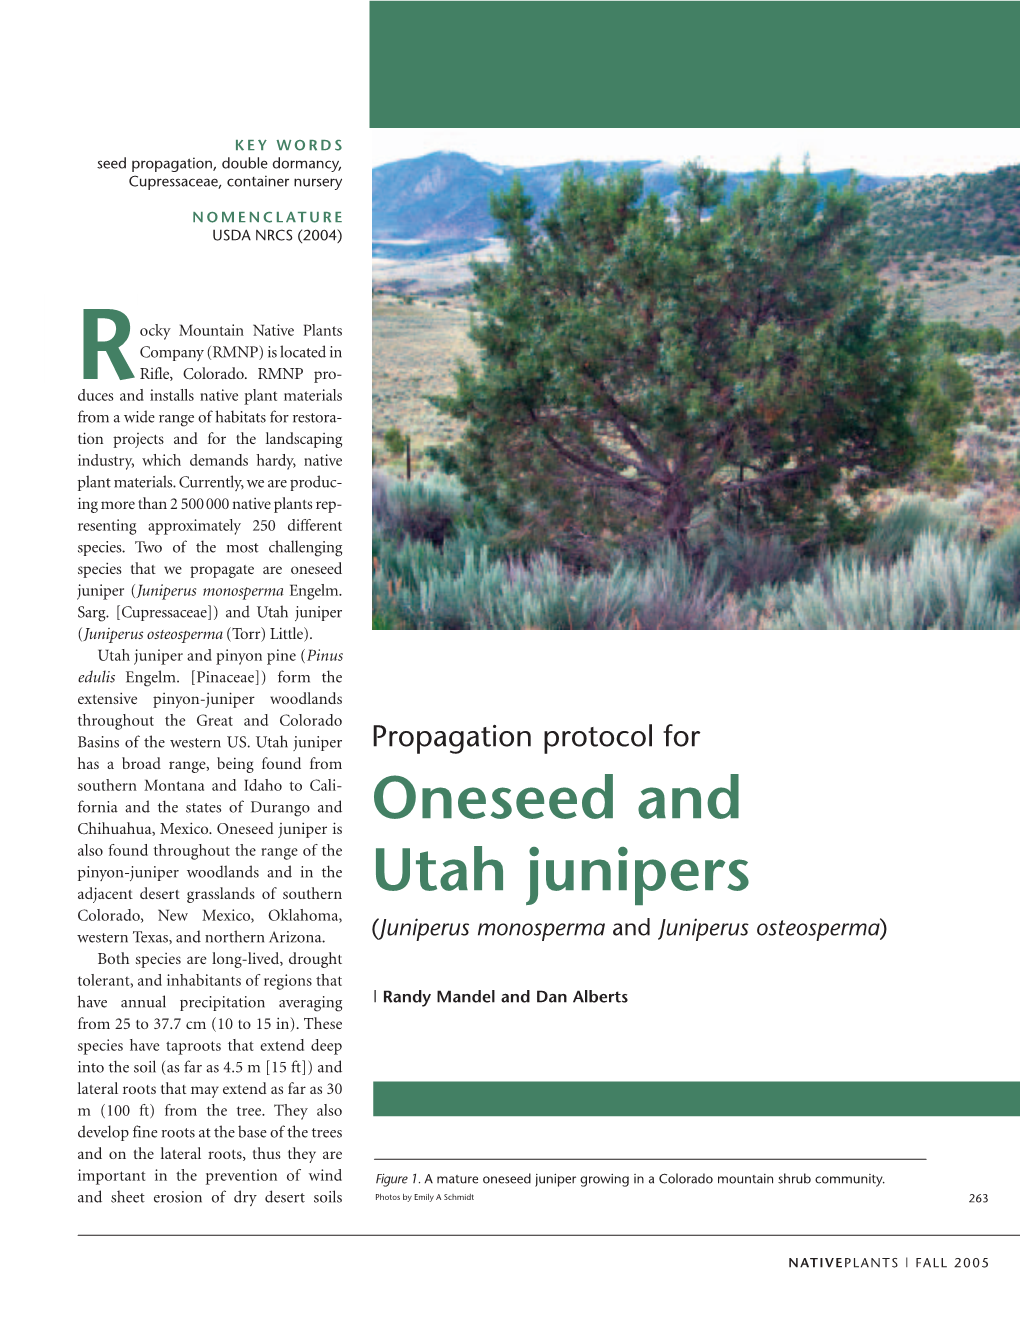 ONESEED and UTAH JUNIPERS Also Needed During Transplanting to Seedling Containers to Avoid J-Root Development